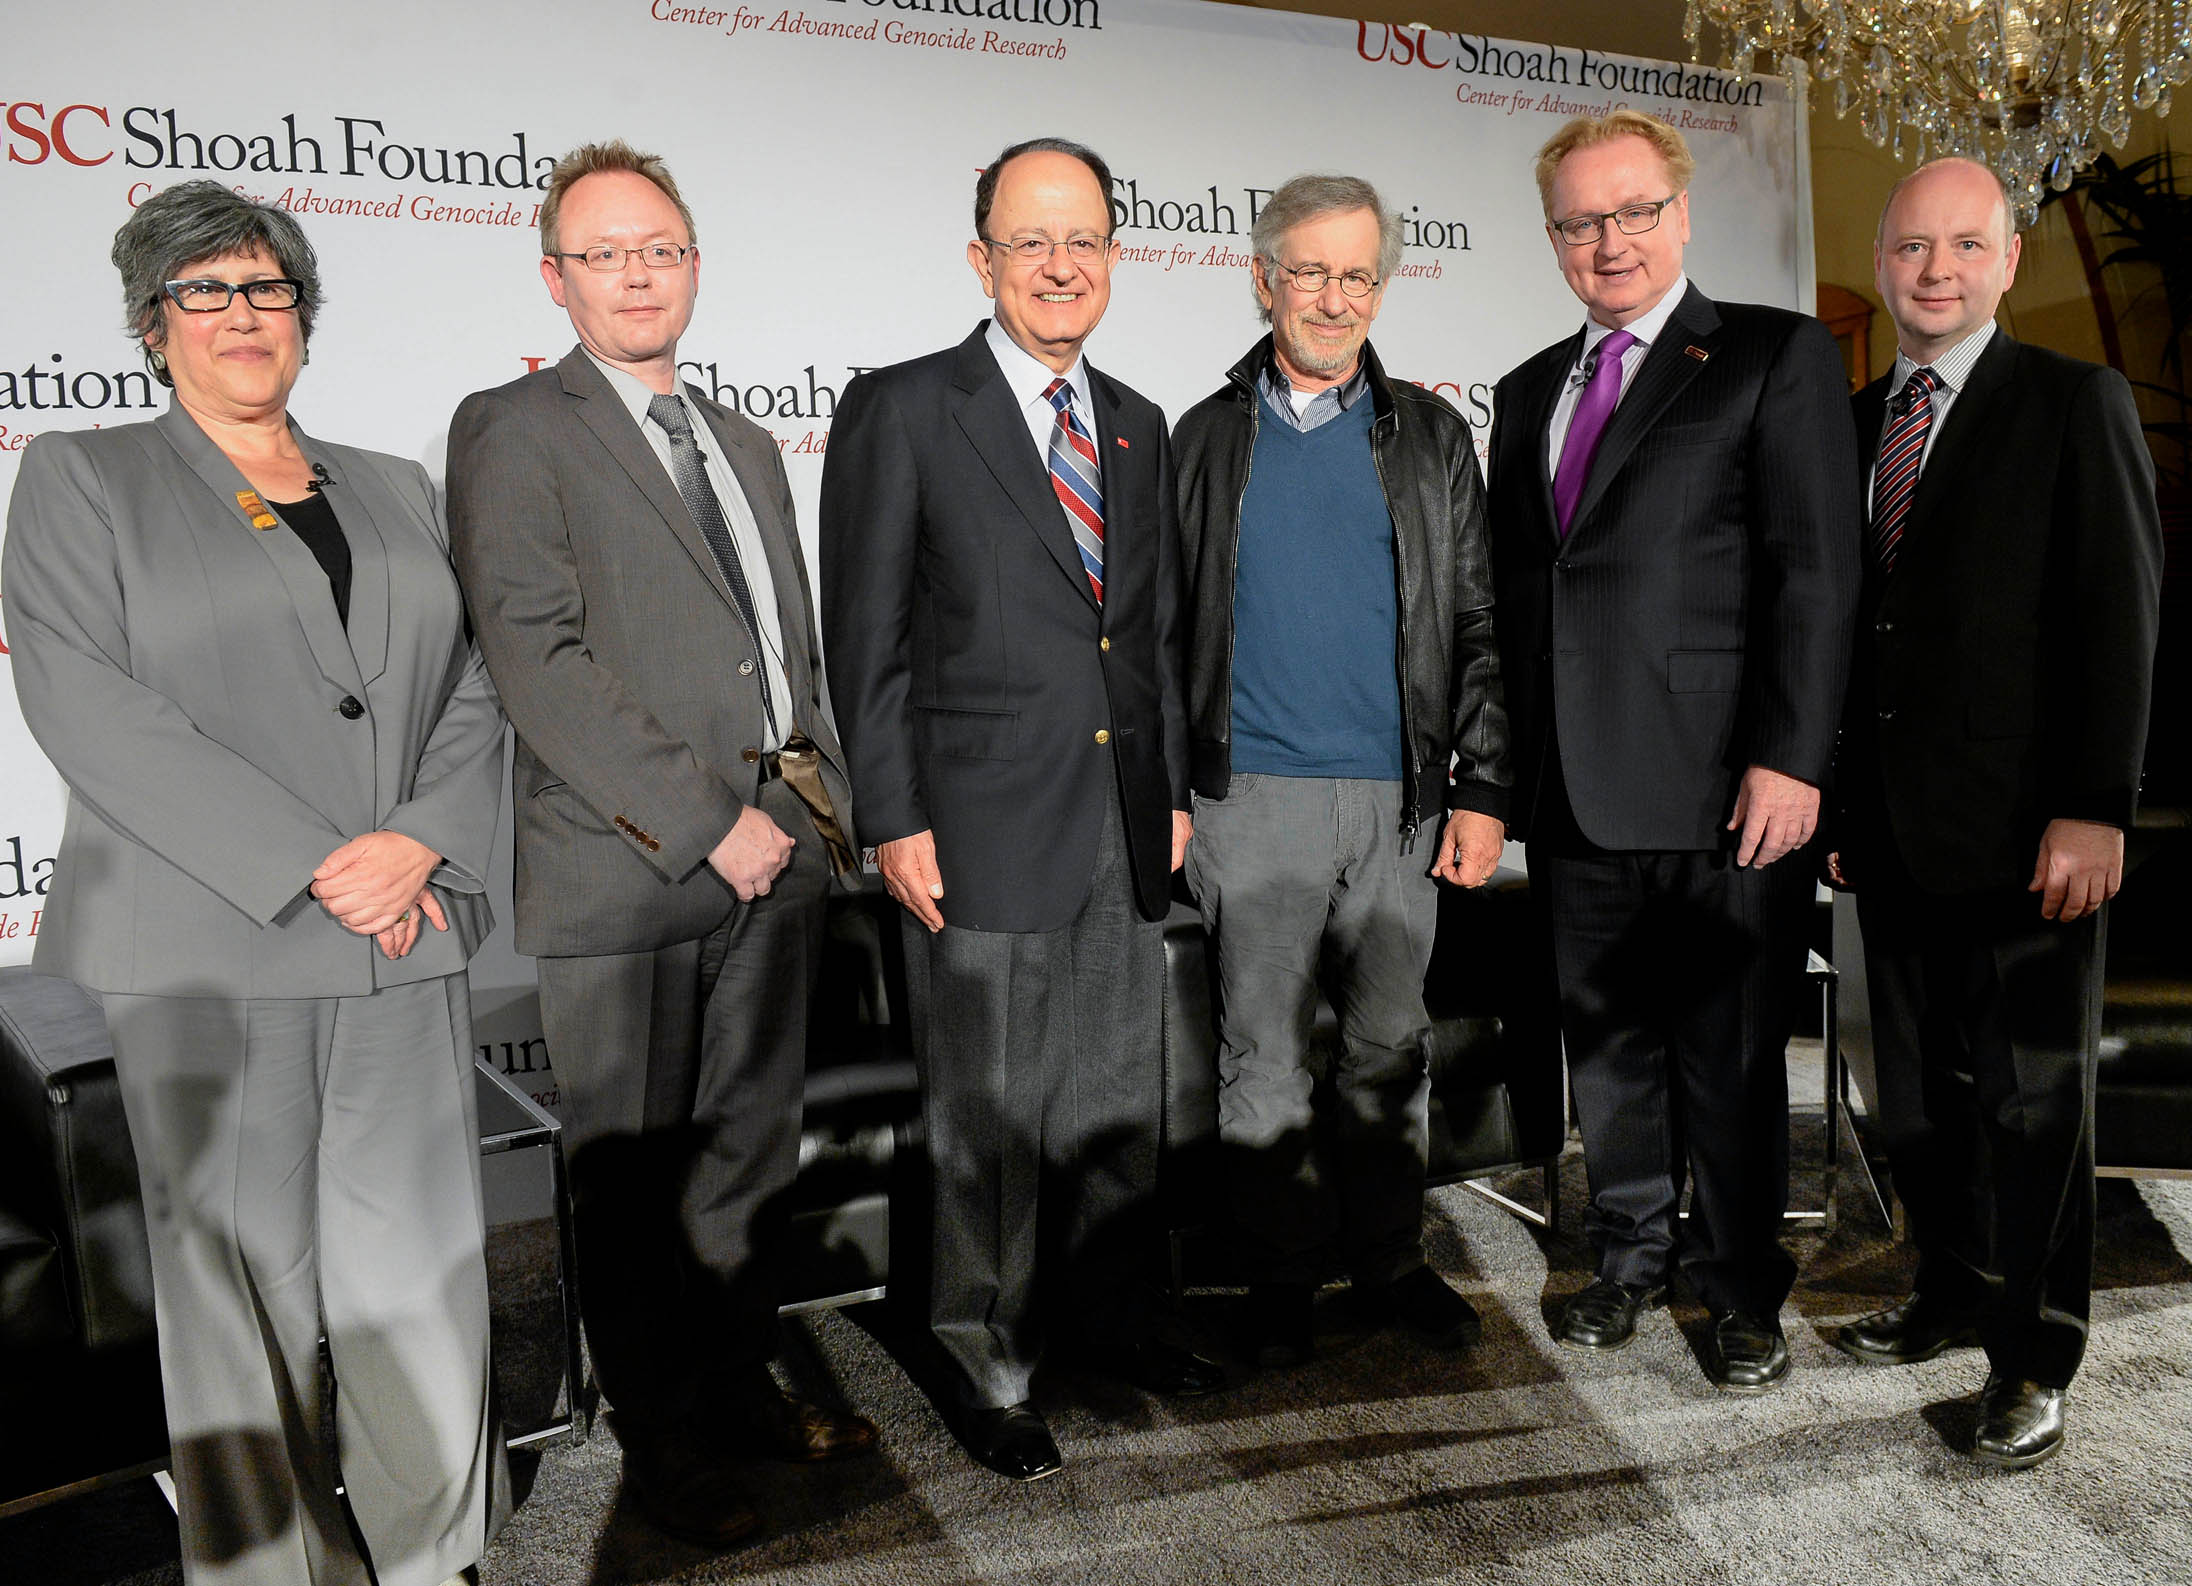 USC Shoah Foundation Center for Advanced Genocide Research launched.